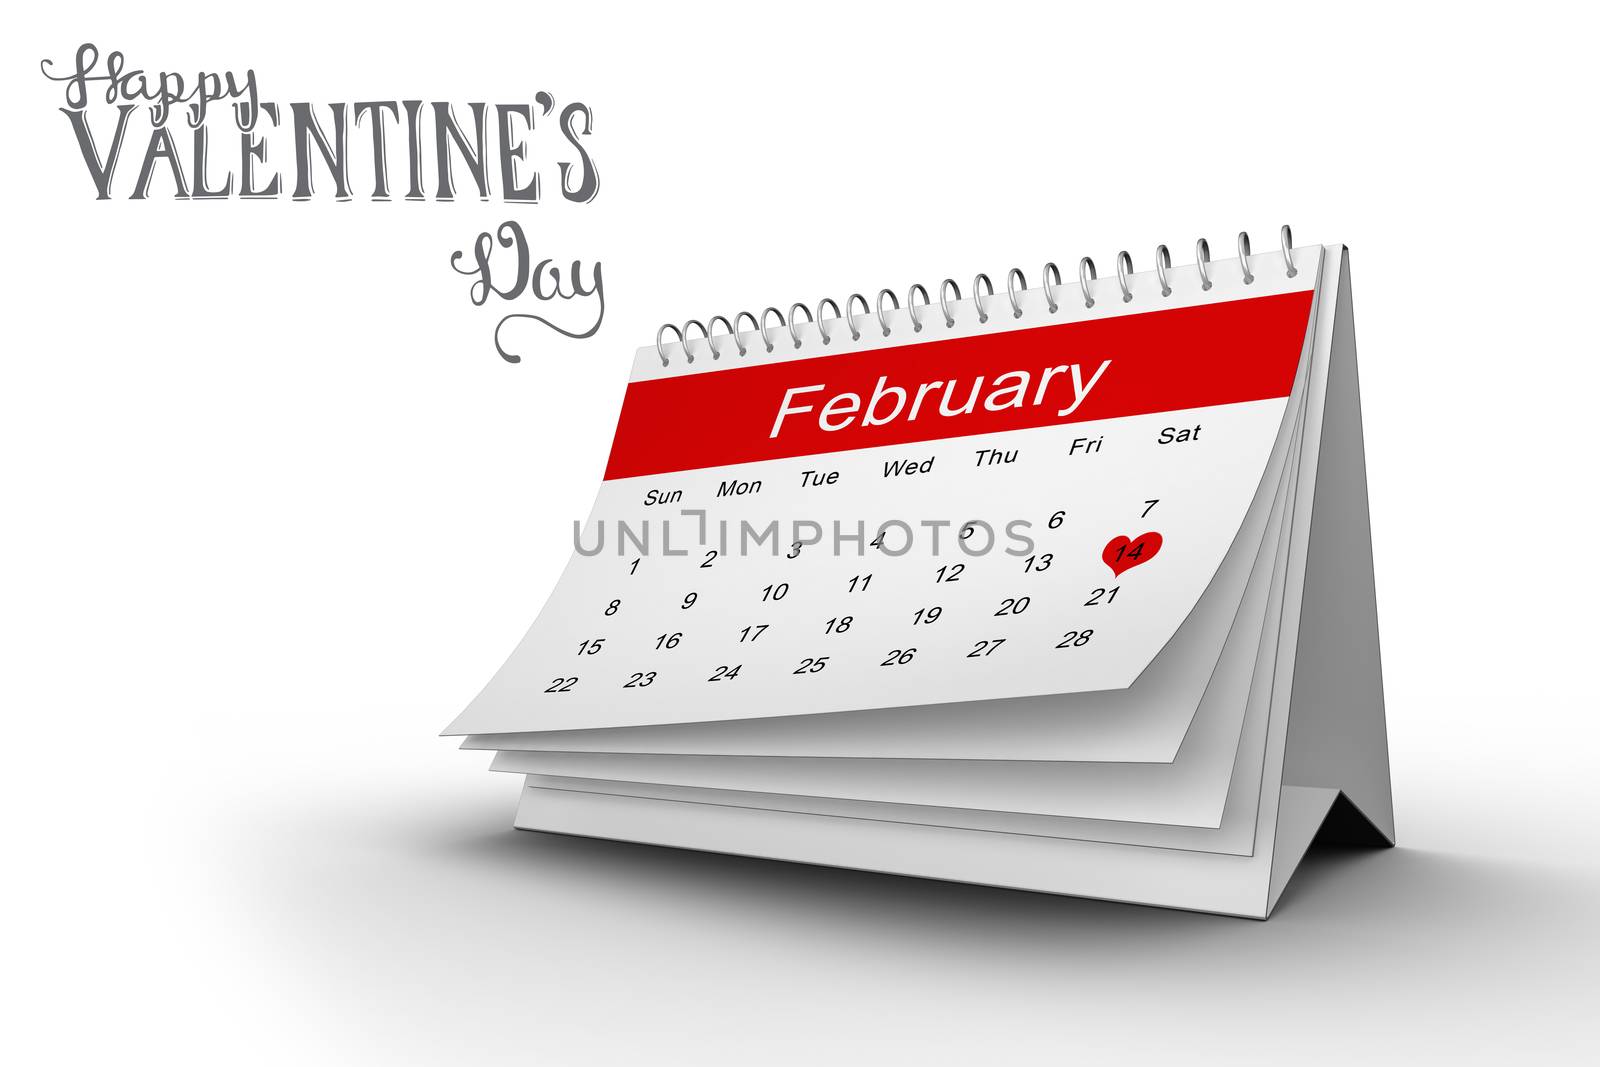 Valentines message against february calendar